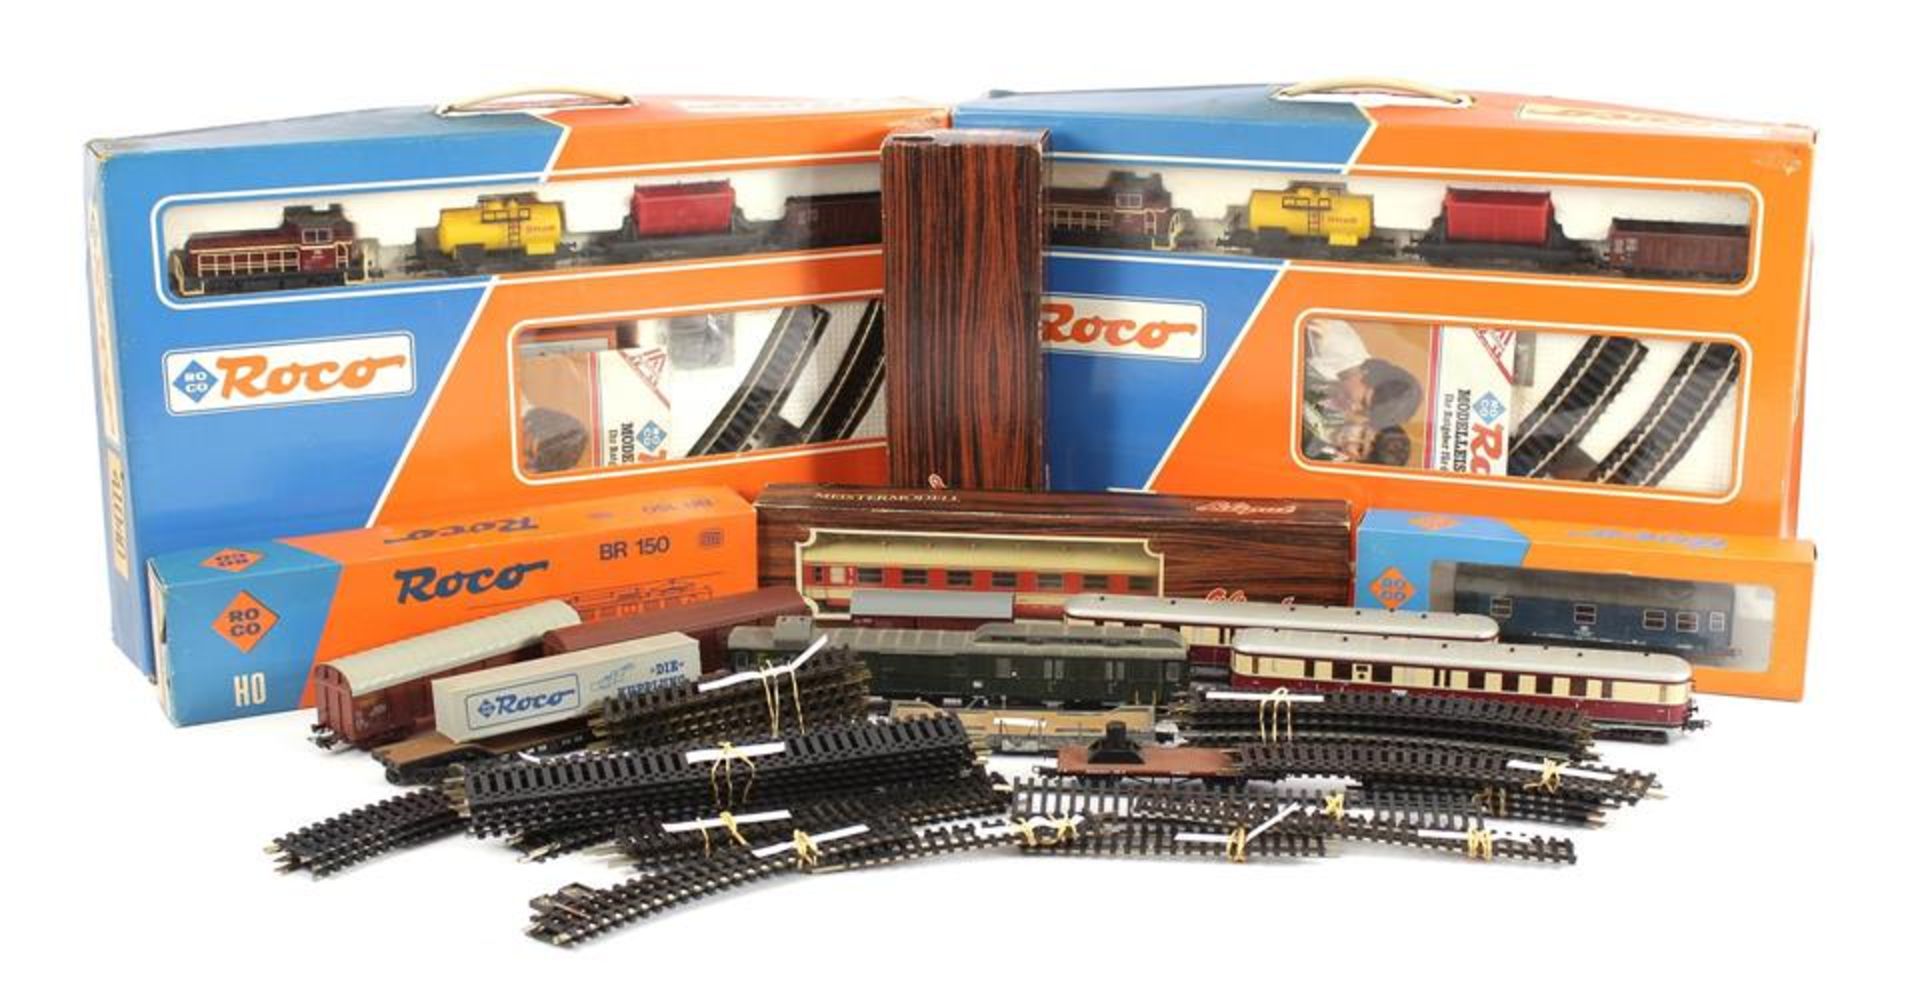 Collection of Roco trains, wagons, rails and 2 boxes with sets number 41040